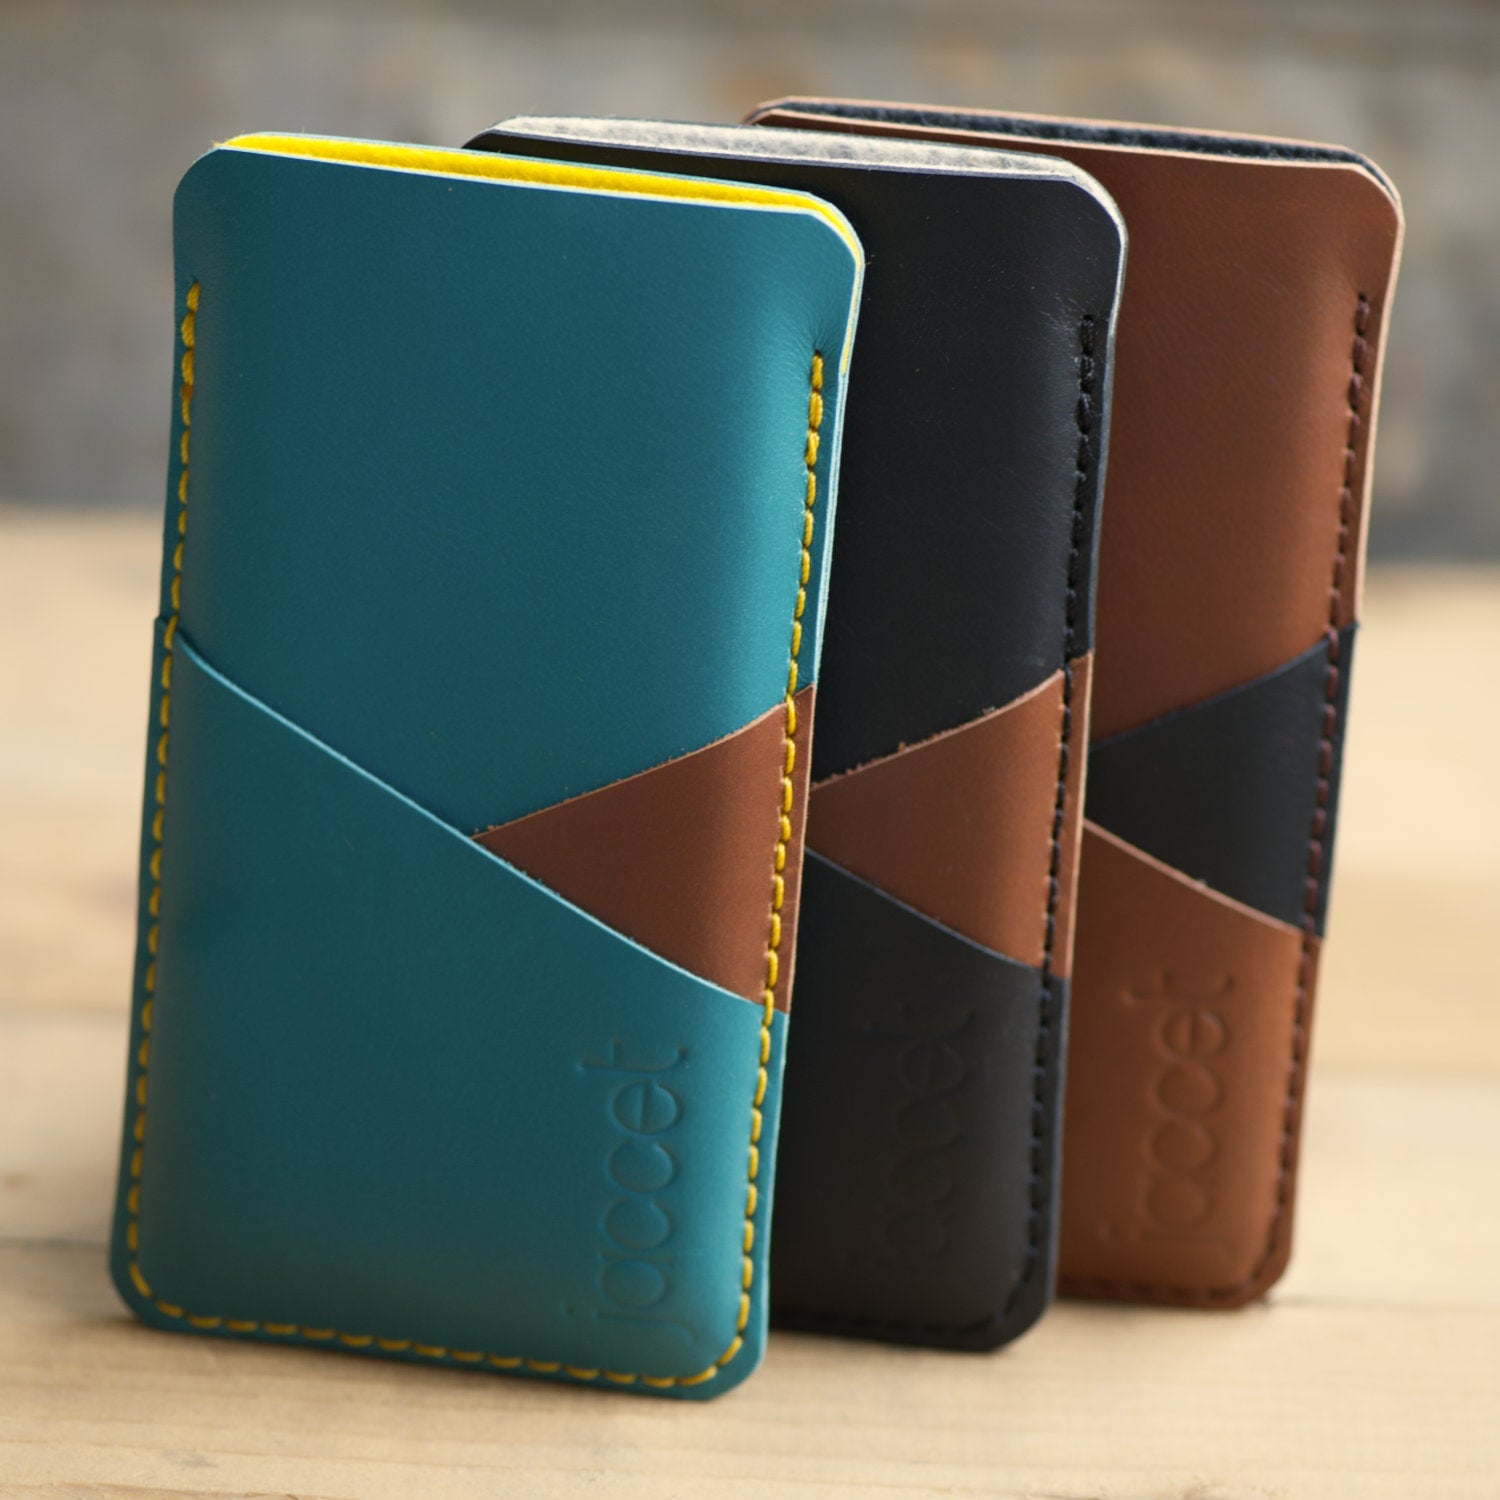 Full-grain leather Sony Xperia sleeve - Turquoise leather with two pockets for cards